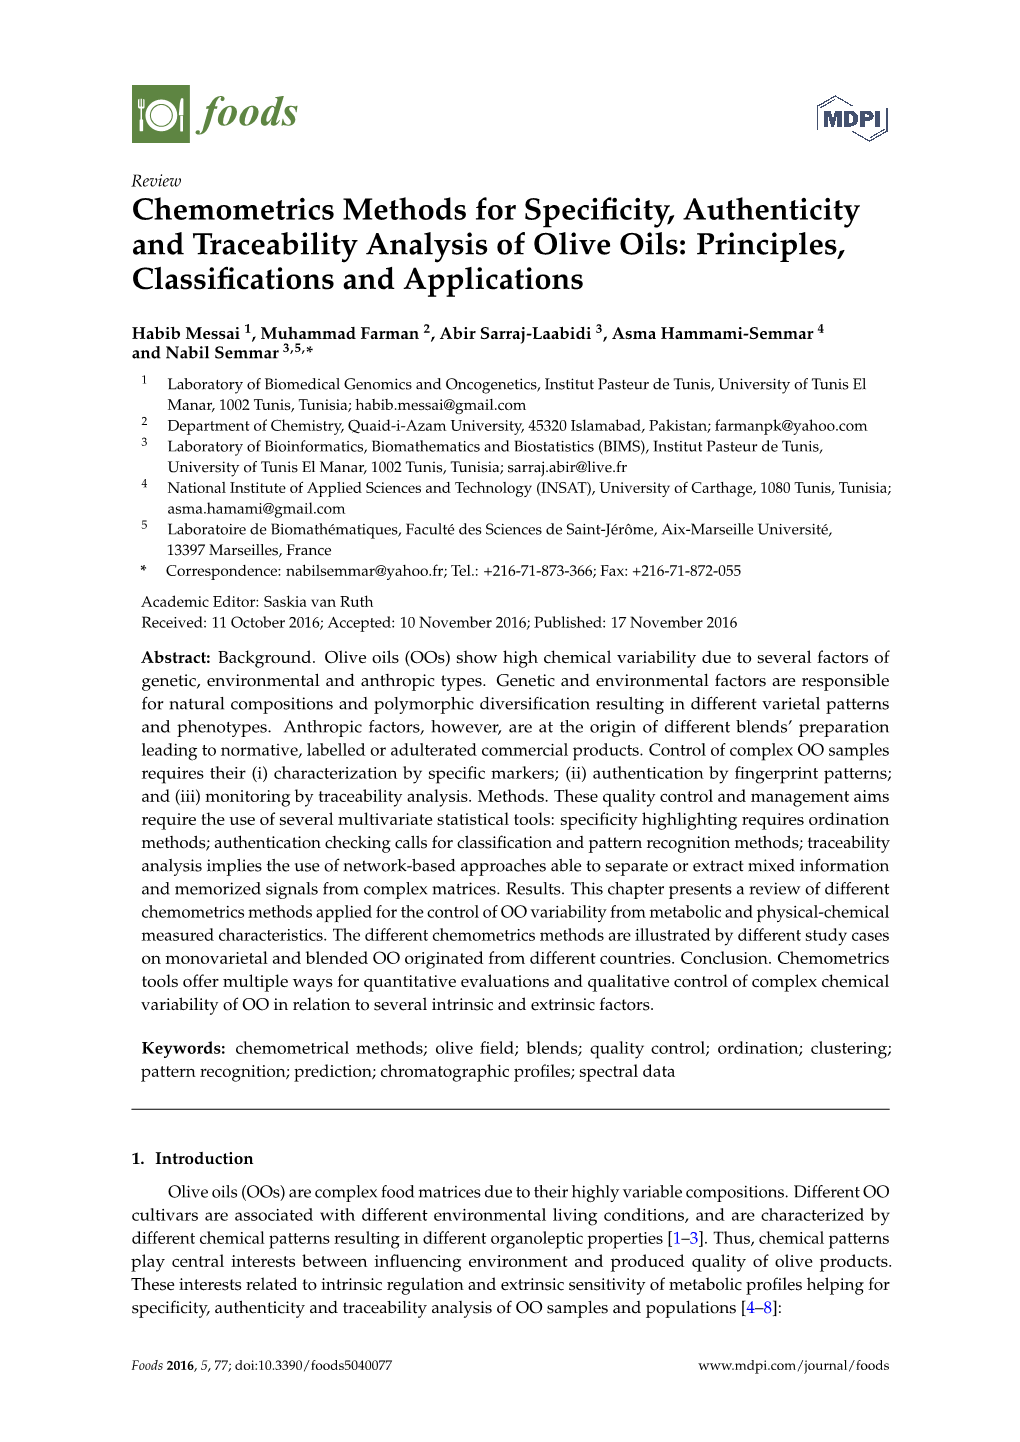 Chemometrics Methods for Specificity, Authenticity And